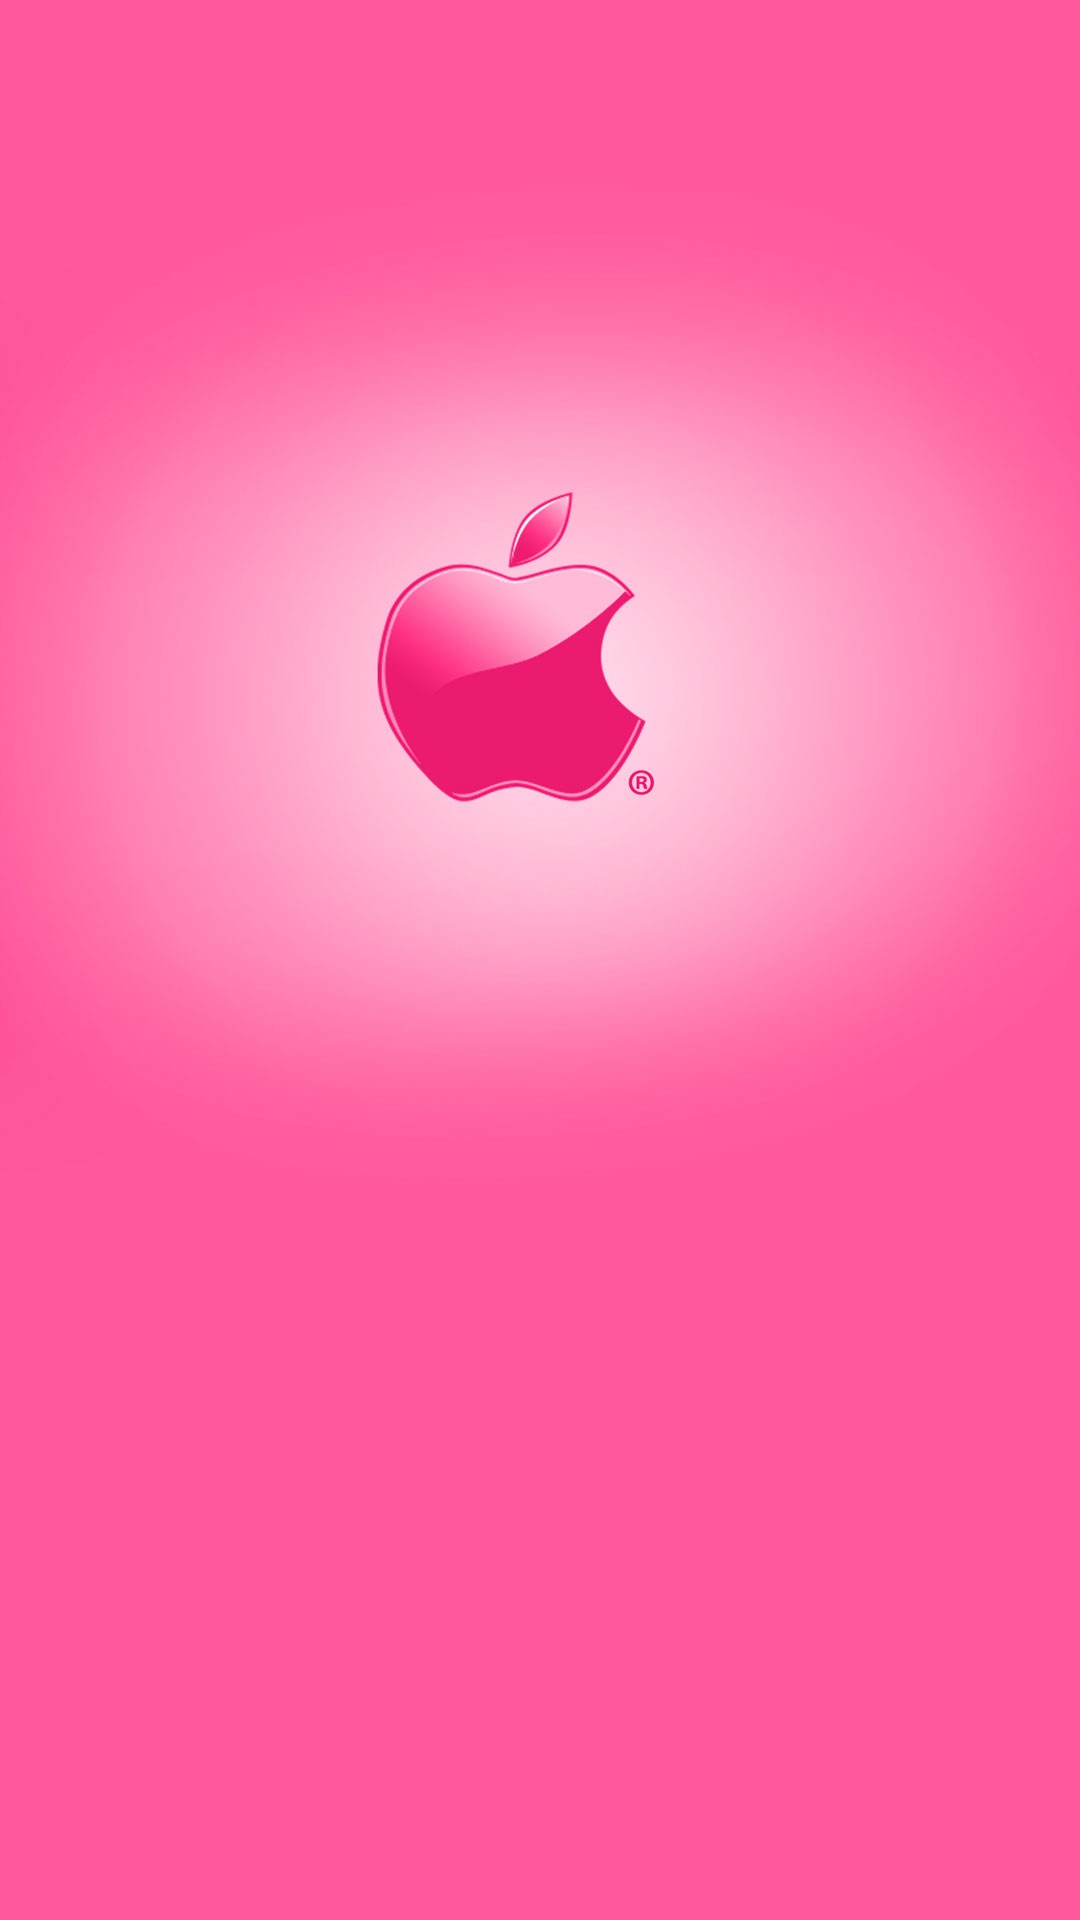 Pink Apple Wallpaper For Android - 2019 Android Wallpapers